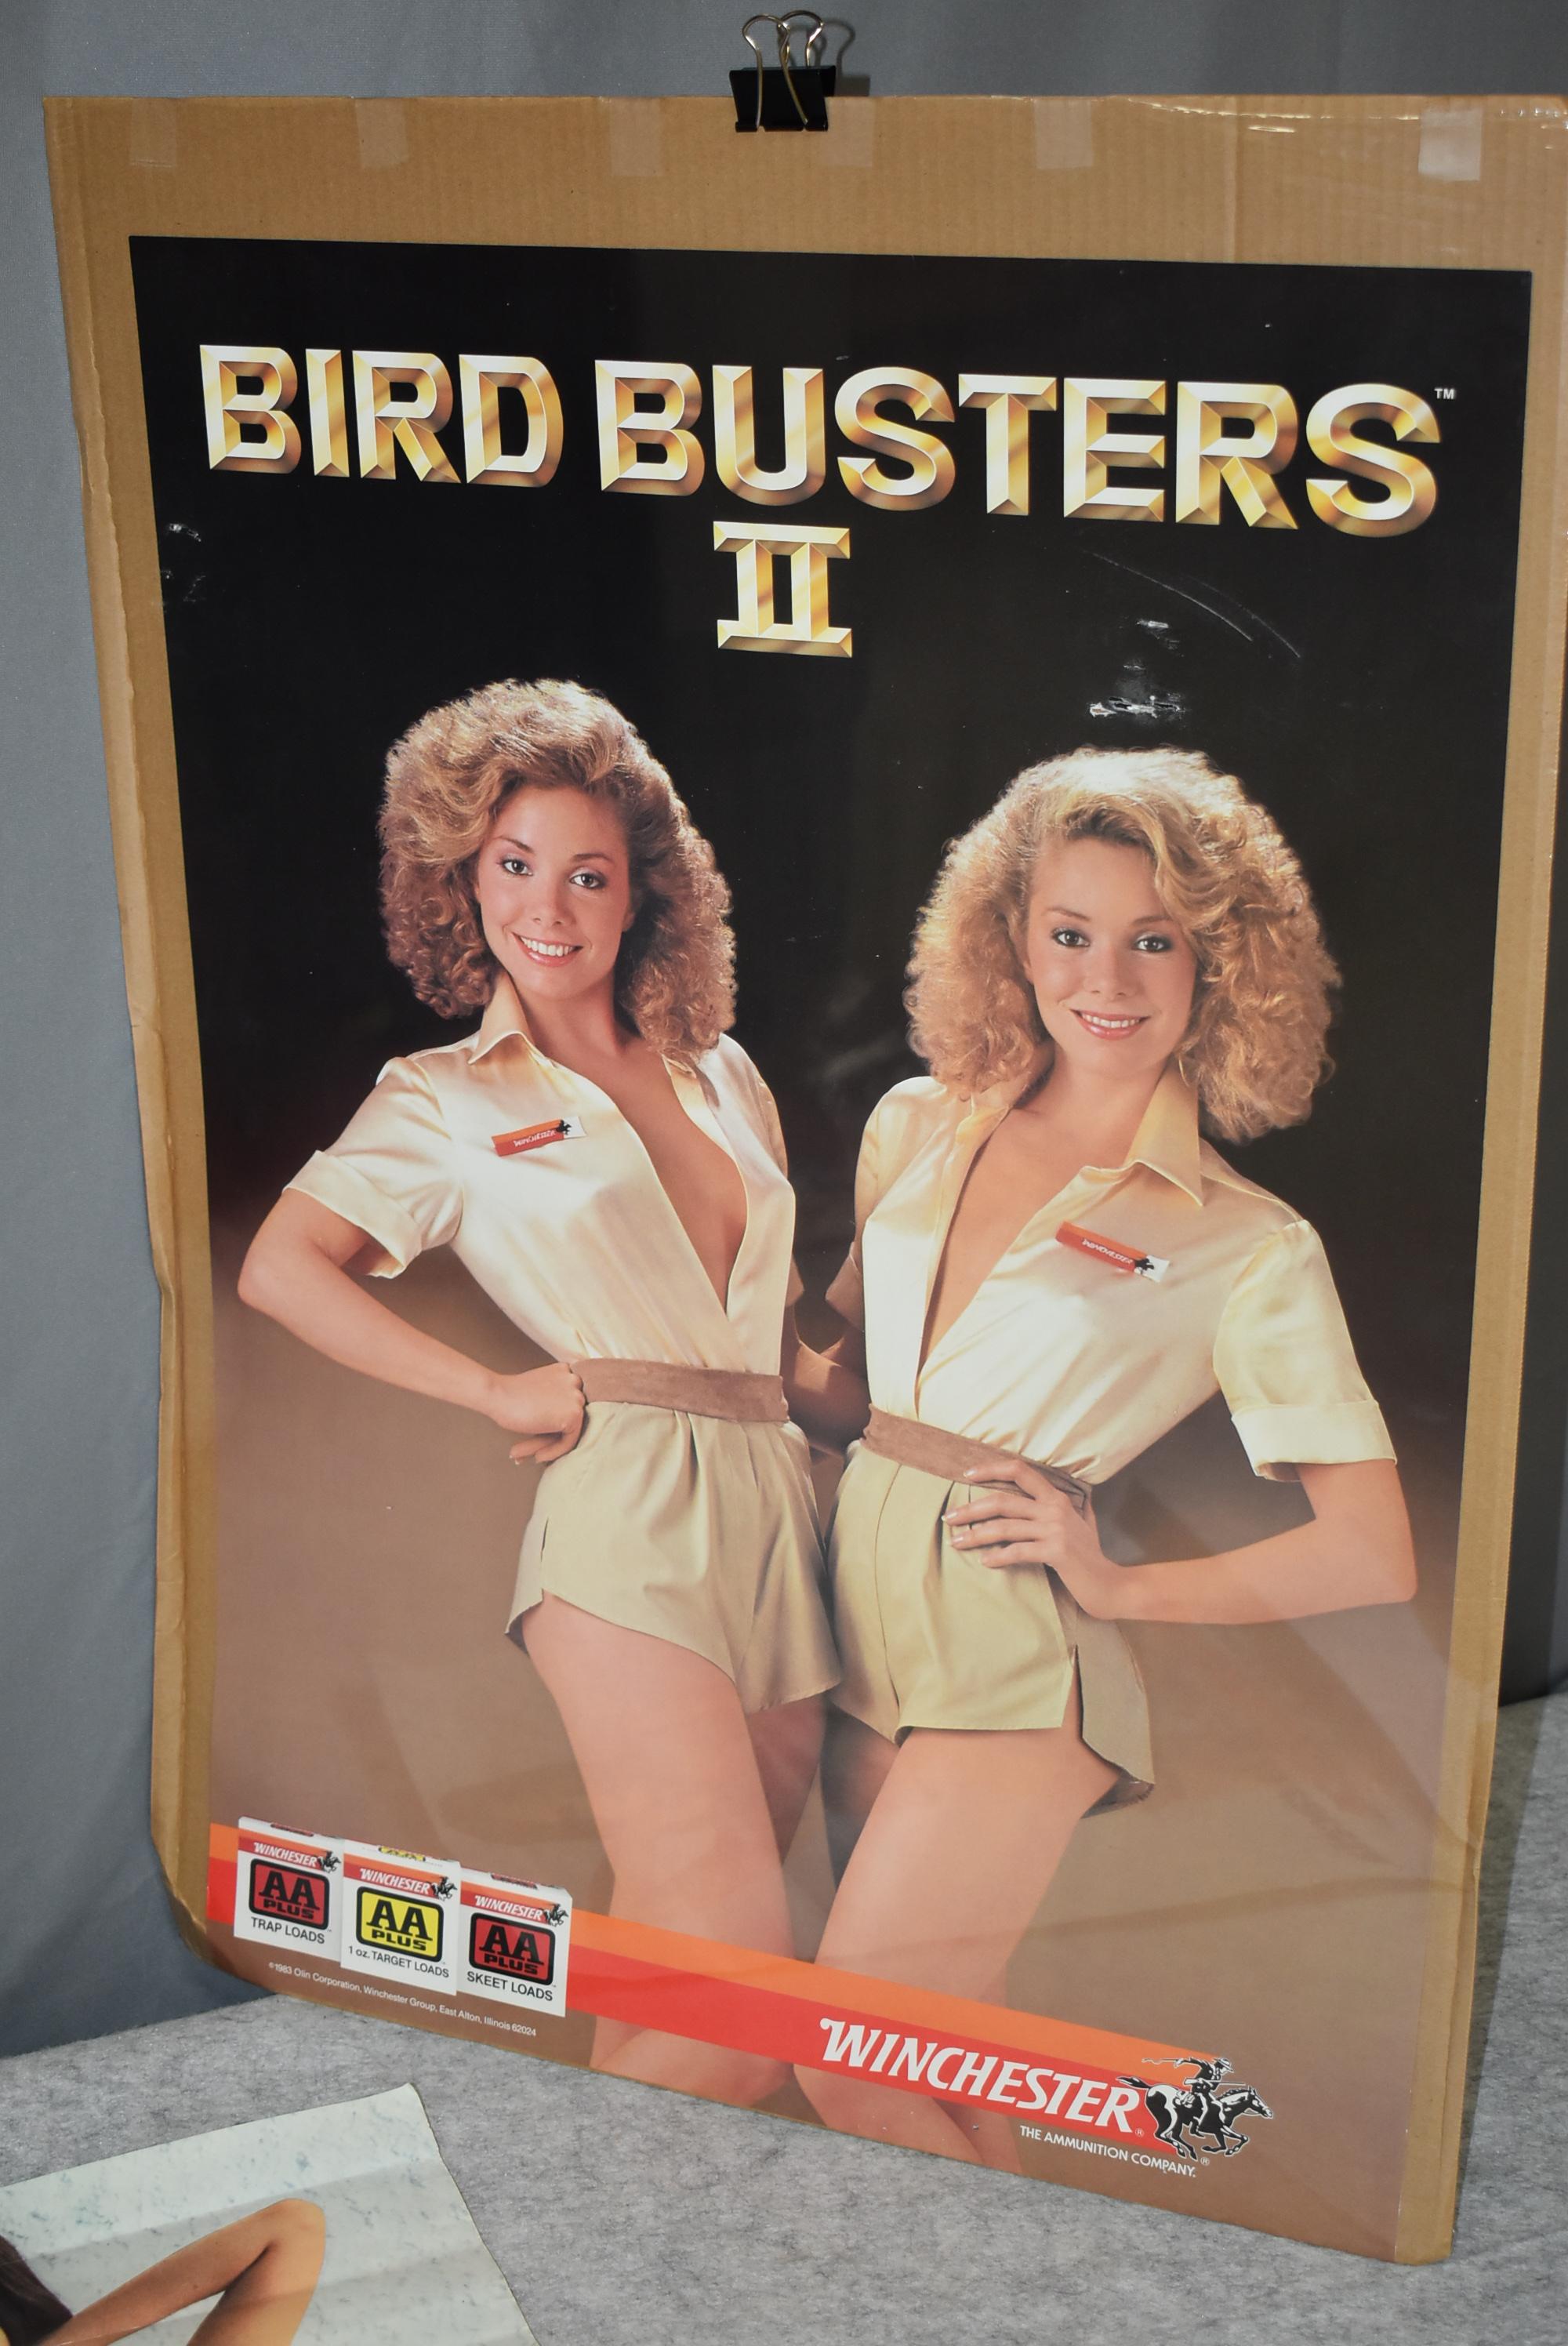 Lot of 2 Winchester Promotional Posters – 1st is 1983 Olin Bird Busters II Featuring Winchester AA T